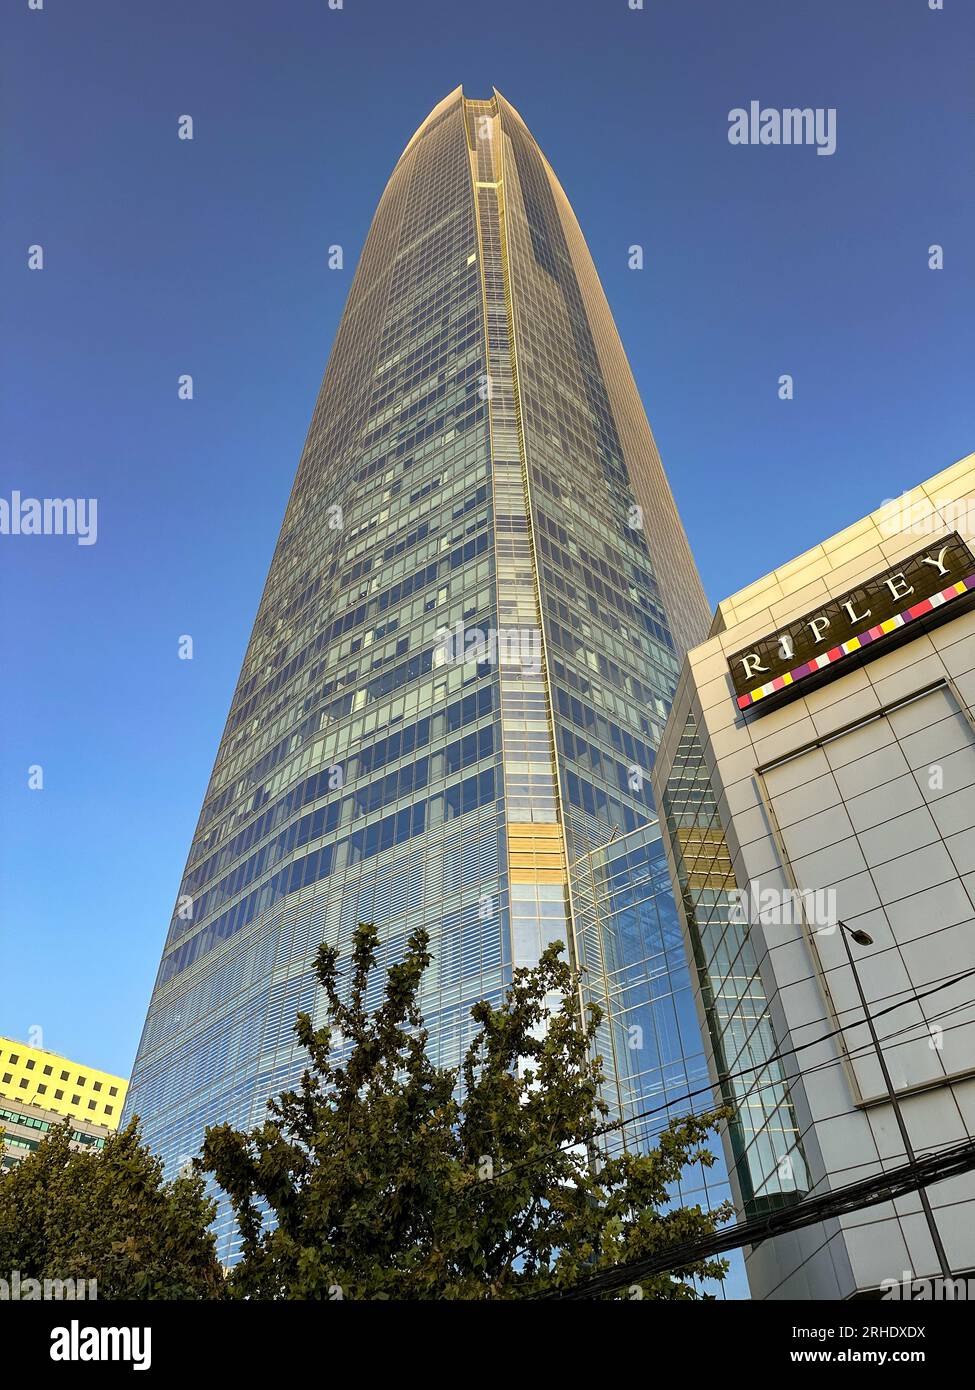 The 62-story Gran Torre Santiago, tallest building in South America, in the Costanera Center.  Providencia, Santiago, Chile. Stock Photo